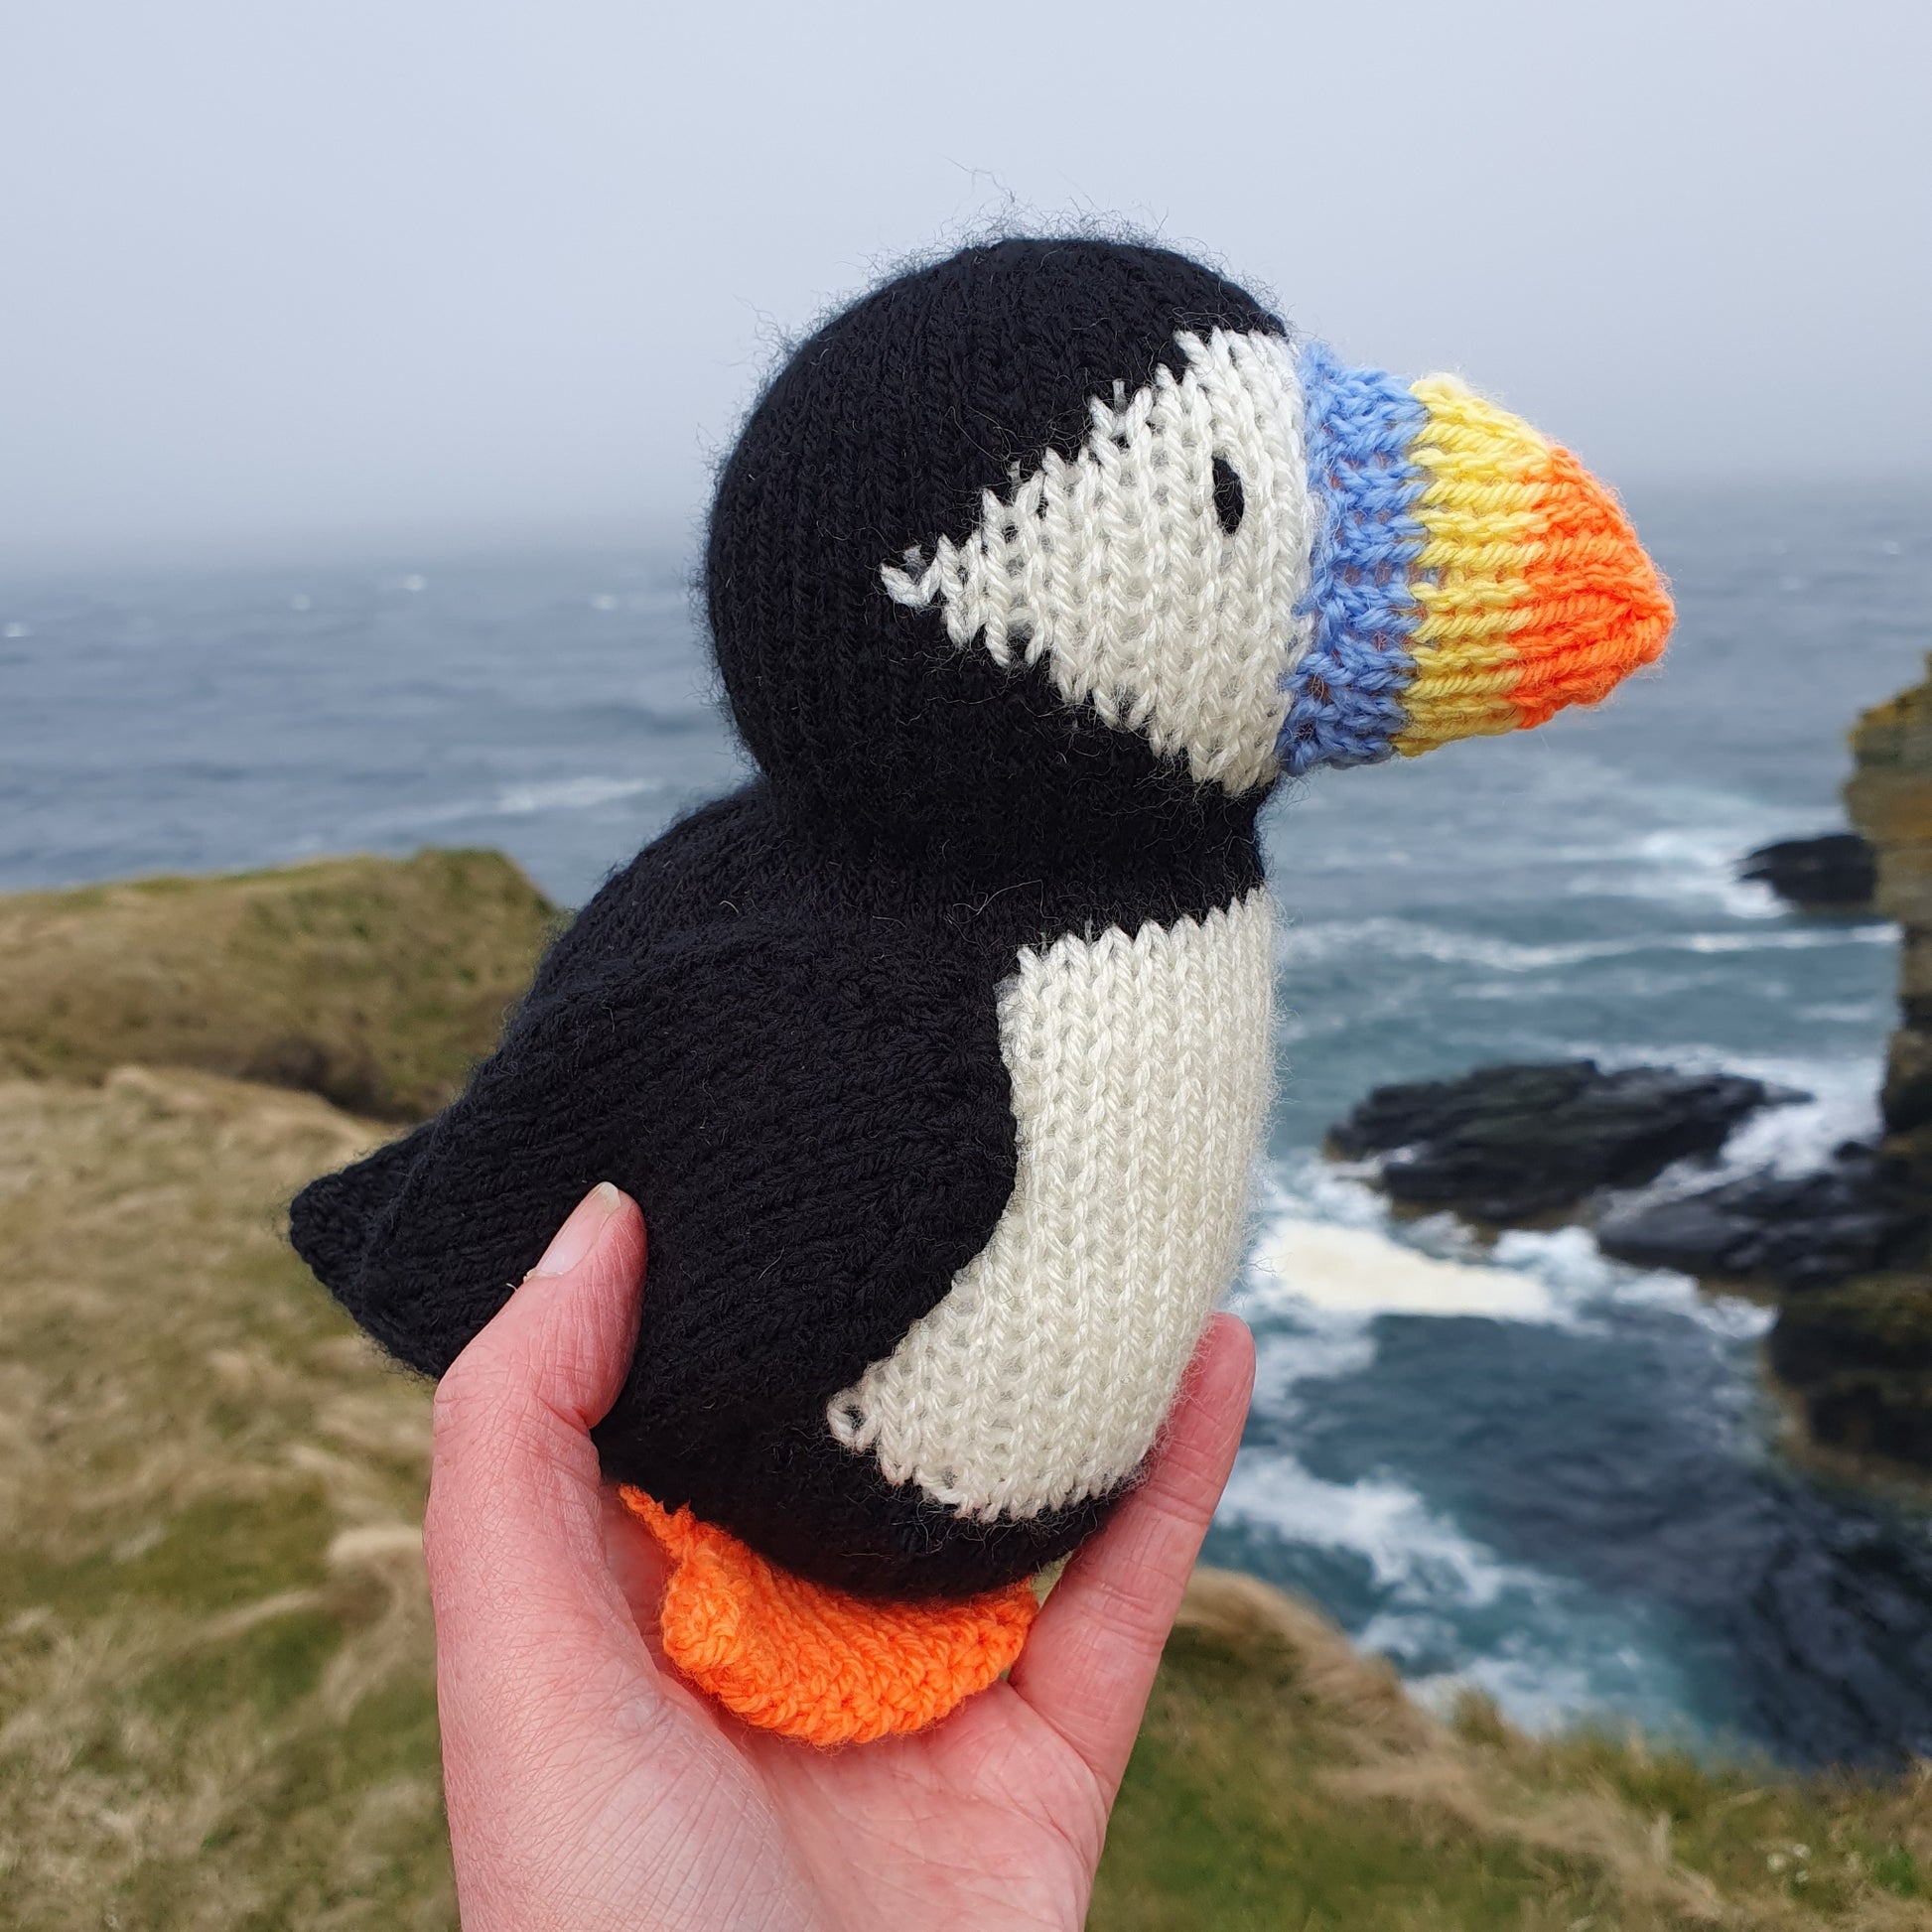 Barry the knitted puffin looking out to sea at Castle Sinclair Girnigoe